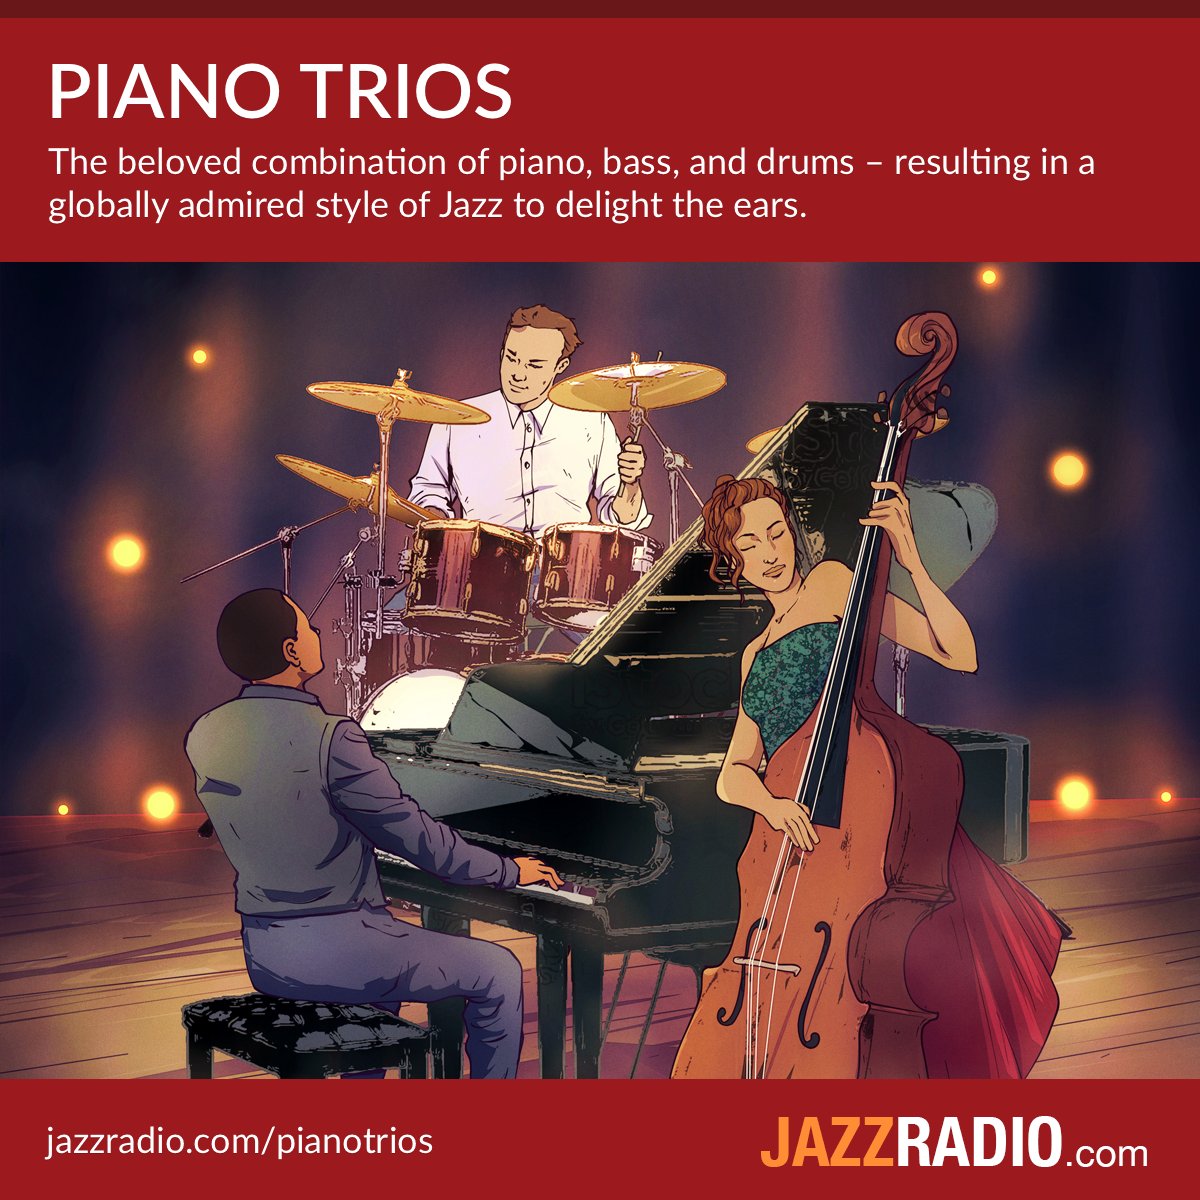 #PianoTrios – the beloved combination of #piano, #bass & #drums, resulting in a globally admired style of jazz to delight the ears. Featuring #BillEvans, #OscarPeterson, #AhmadJamal, #RedGarland & many more:
JAZZRADIO.com/pianotrios

•

#PianoJazzTrios #PianoJazz #JazzRadio #Jazz